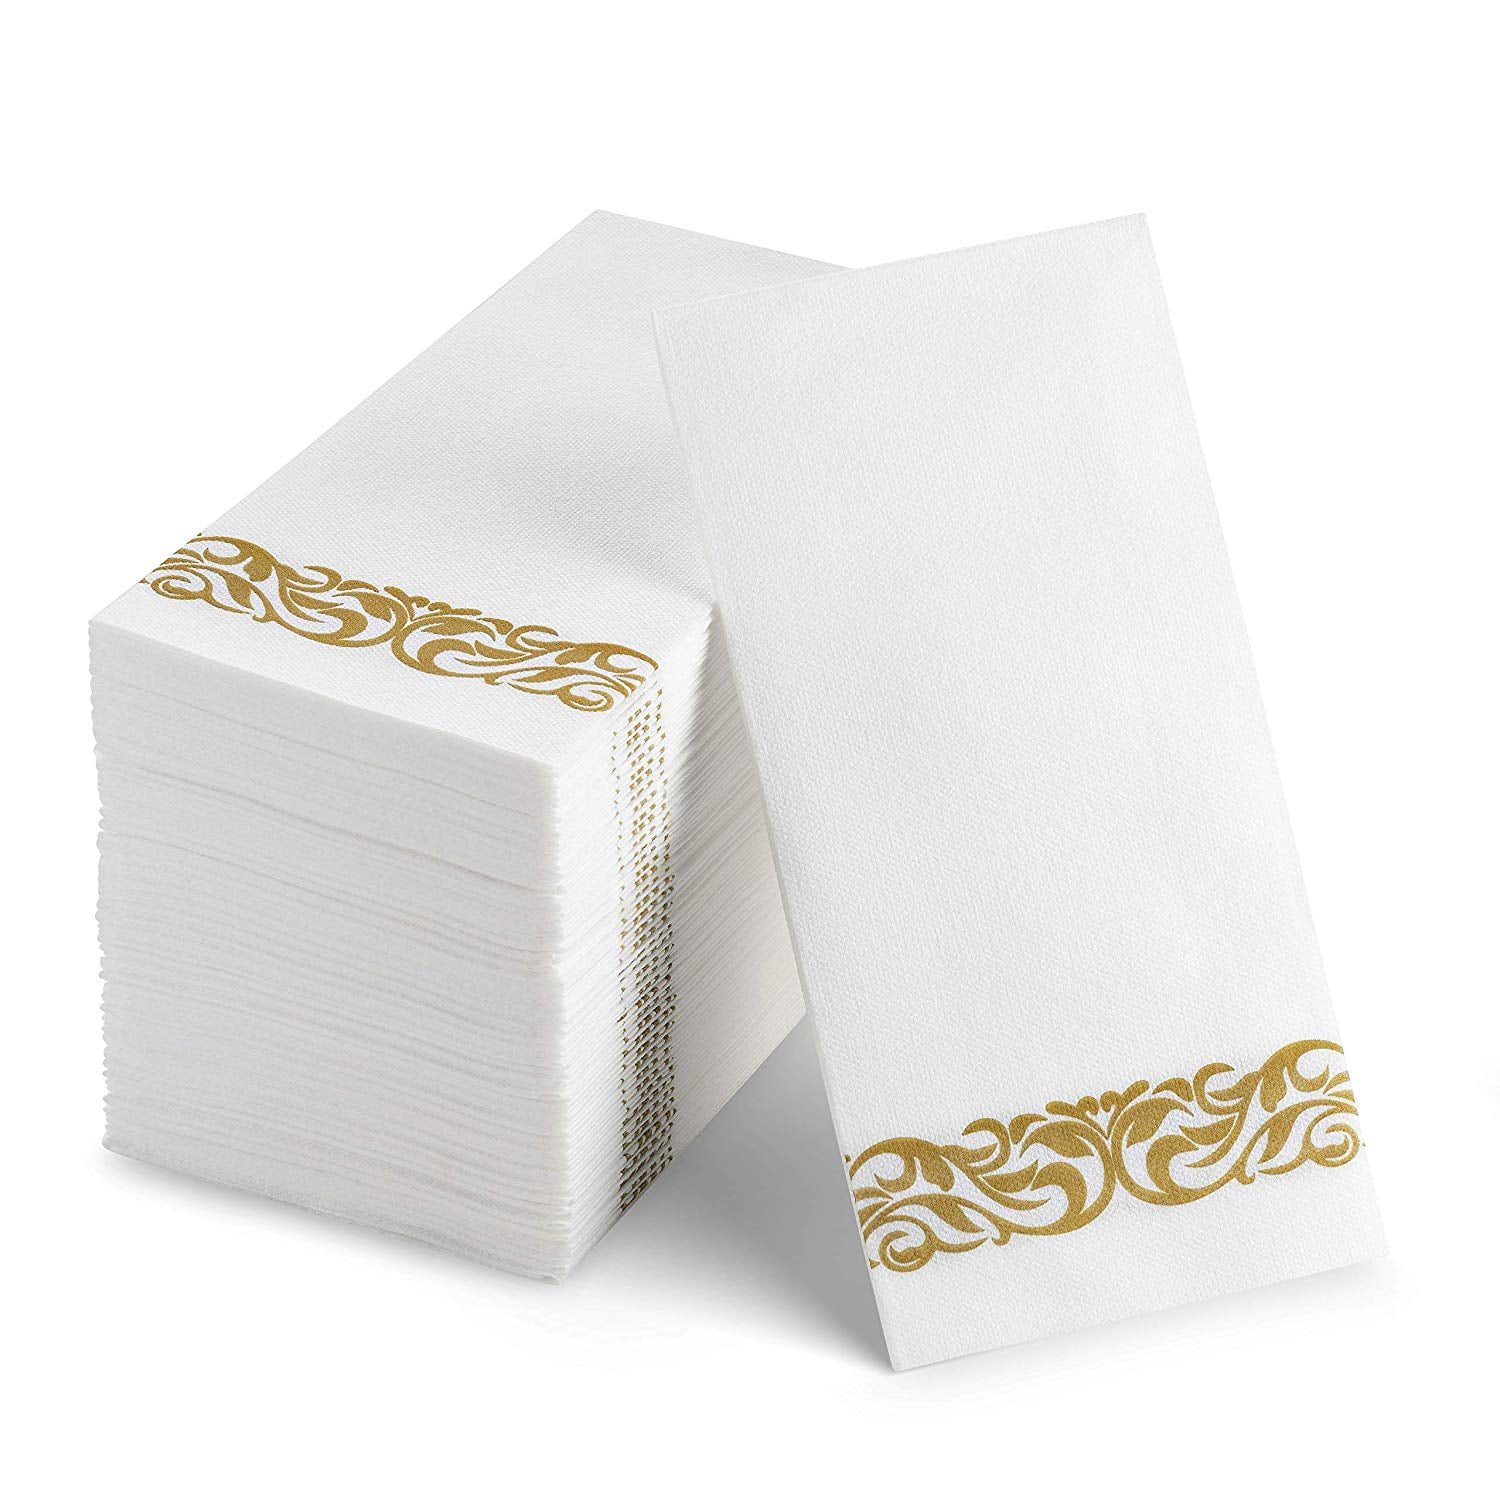 Disposable Guest Napkins,Cocktail Hand Towels Perfect for Decorative Bathroom,Dinners,Weddings,Events 100 Gold Pack 